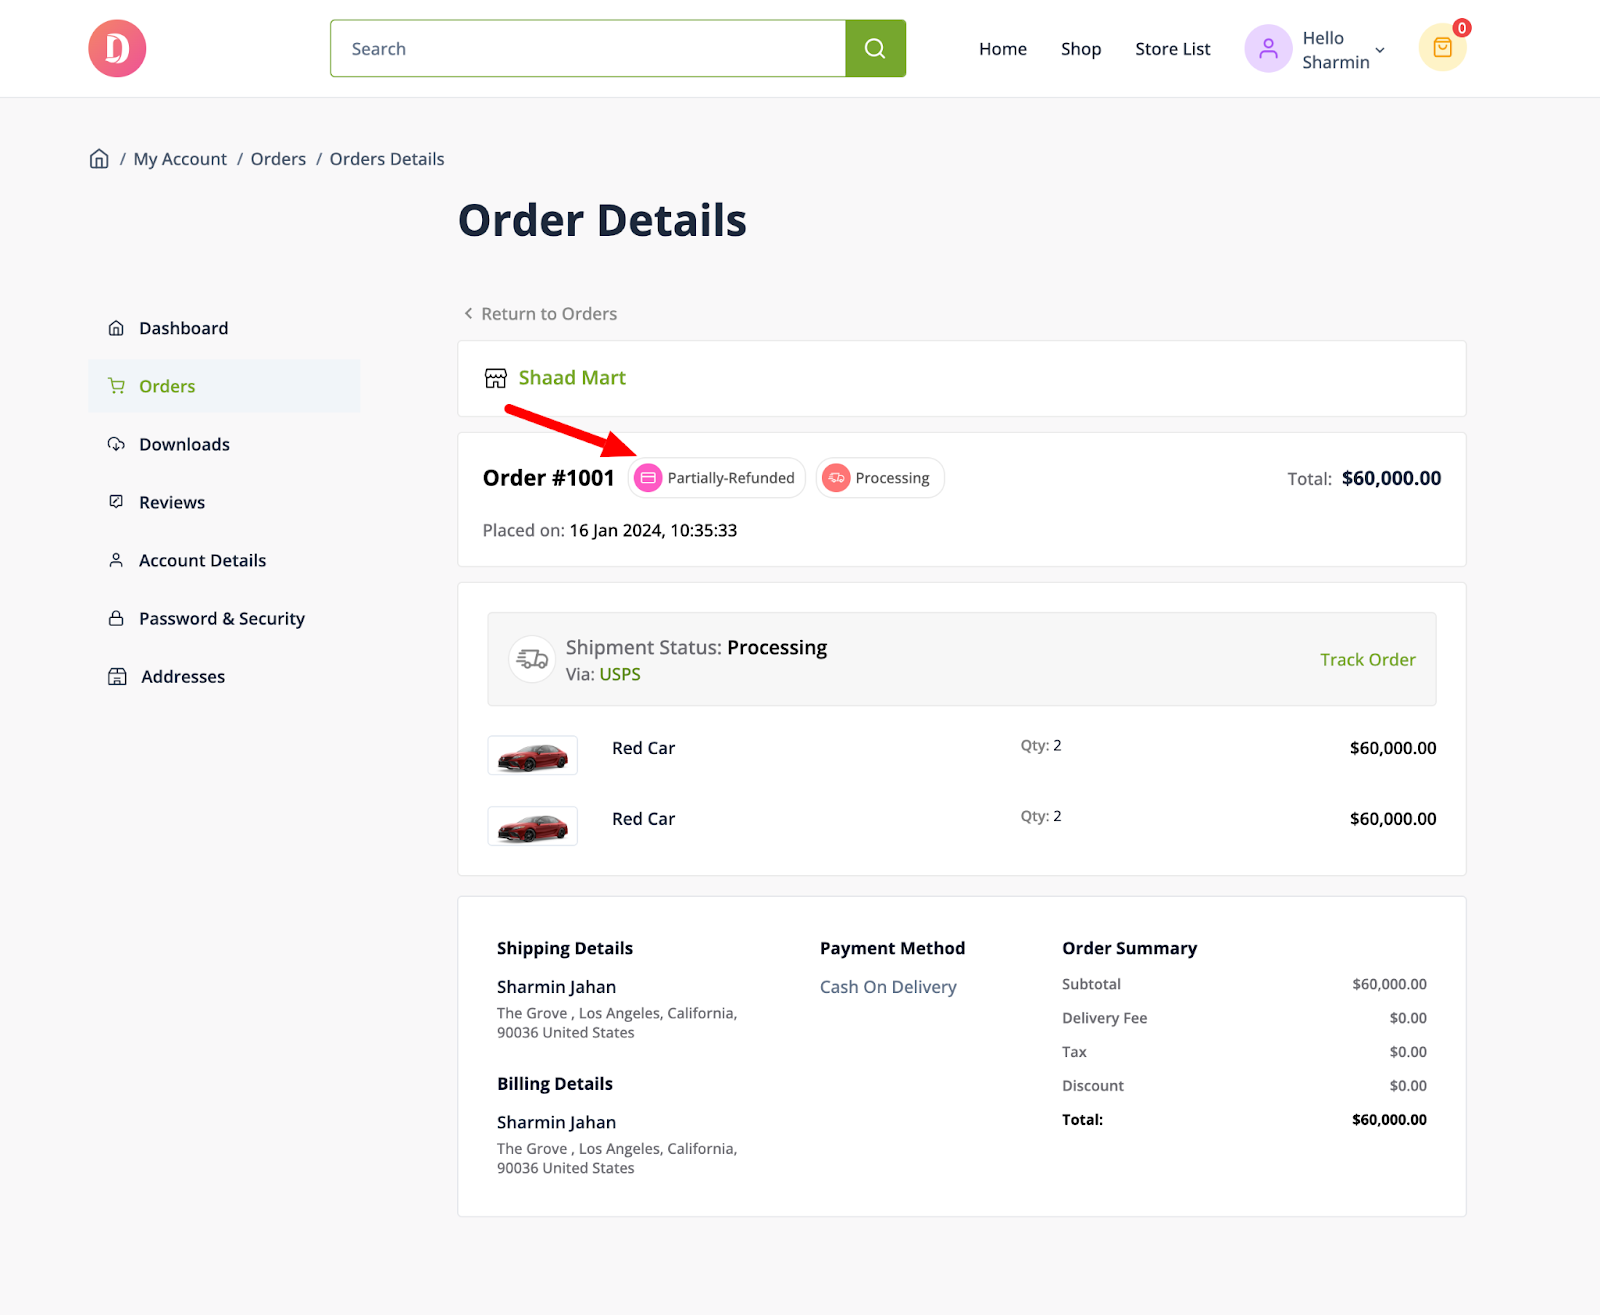 This screenshot shows a partially refunded order details 